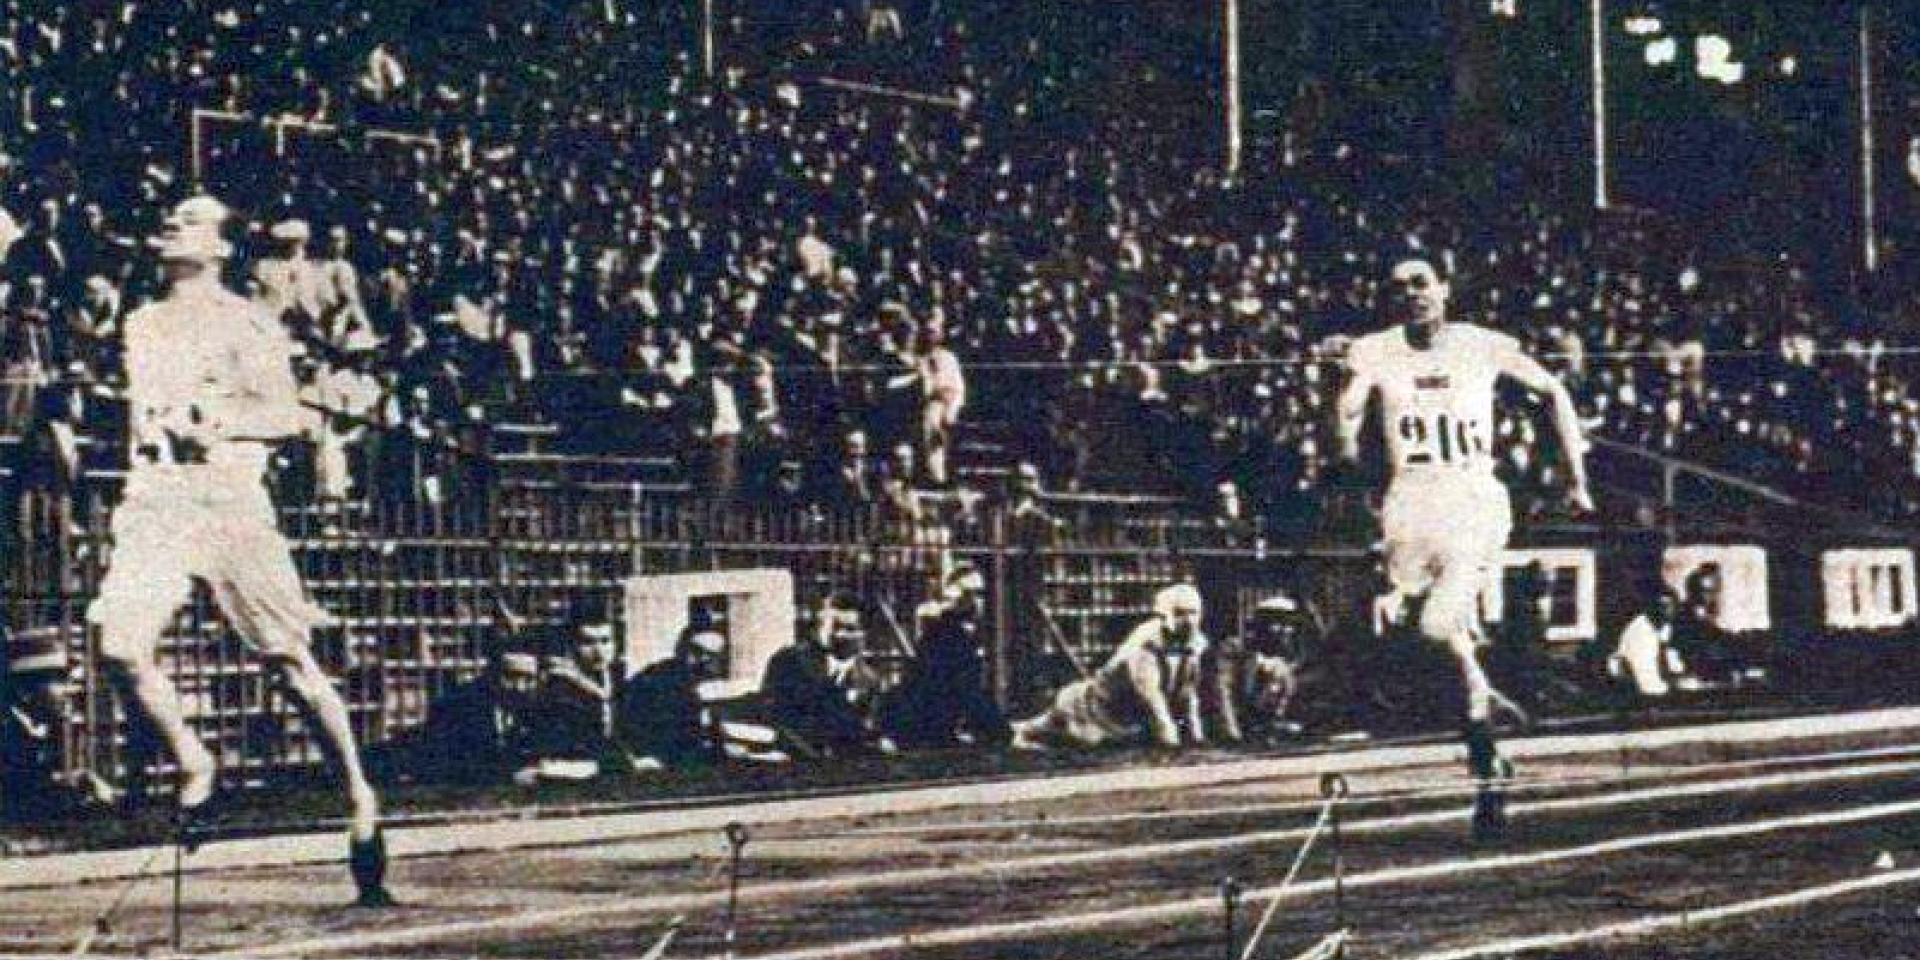 Black and White photo of Eric Liddell running in a race